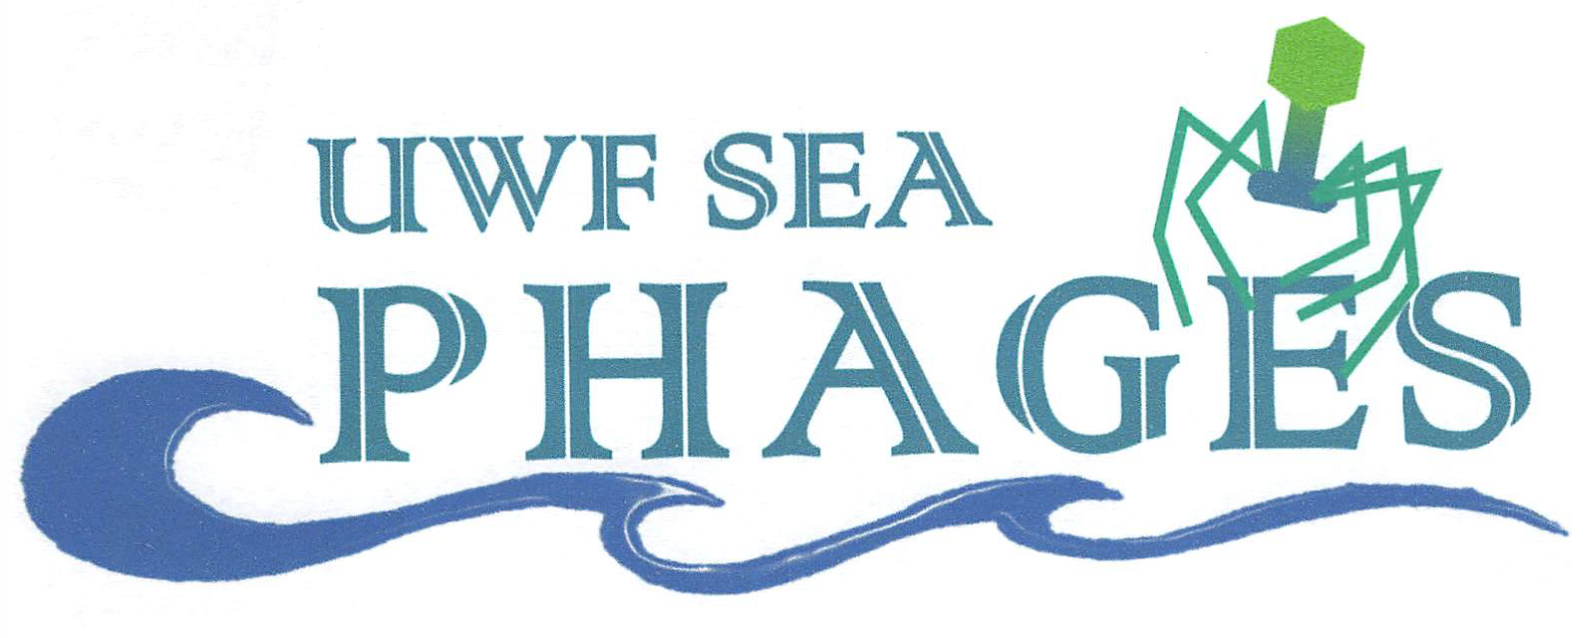 SEA-PHAGES 2019 logo by student